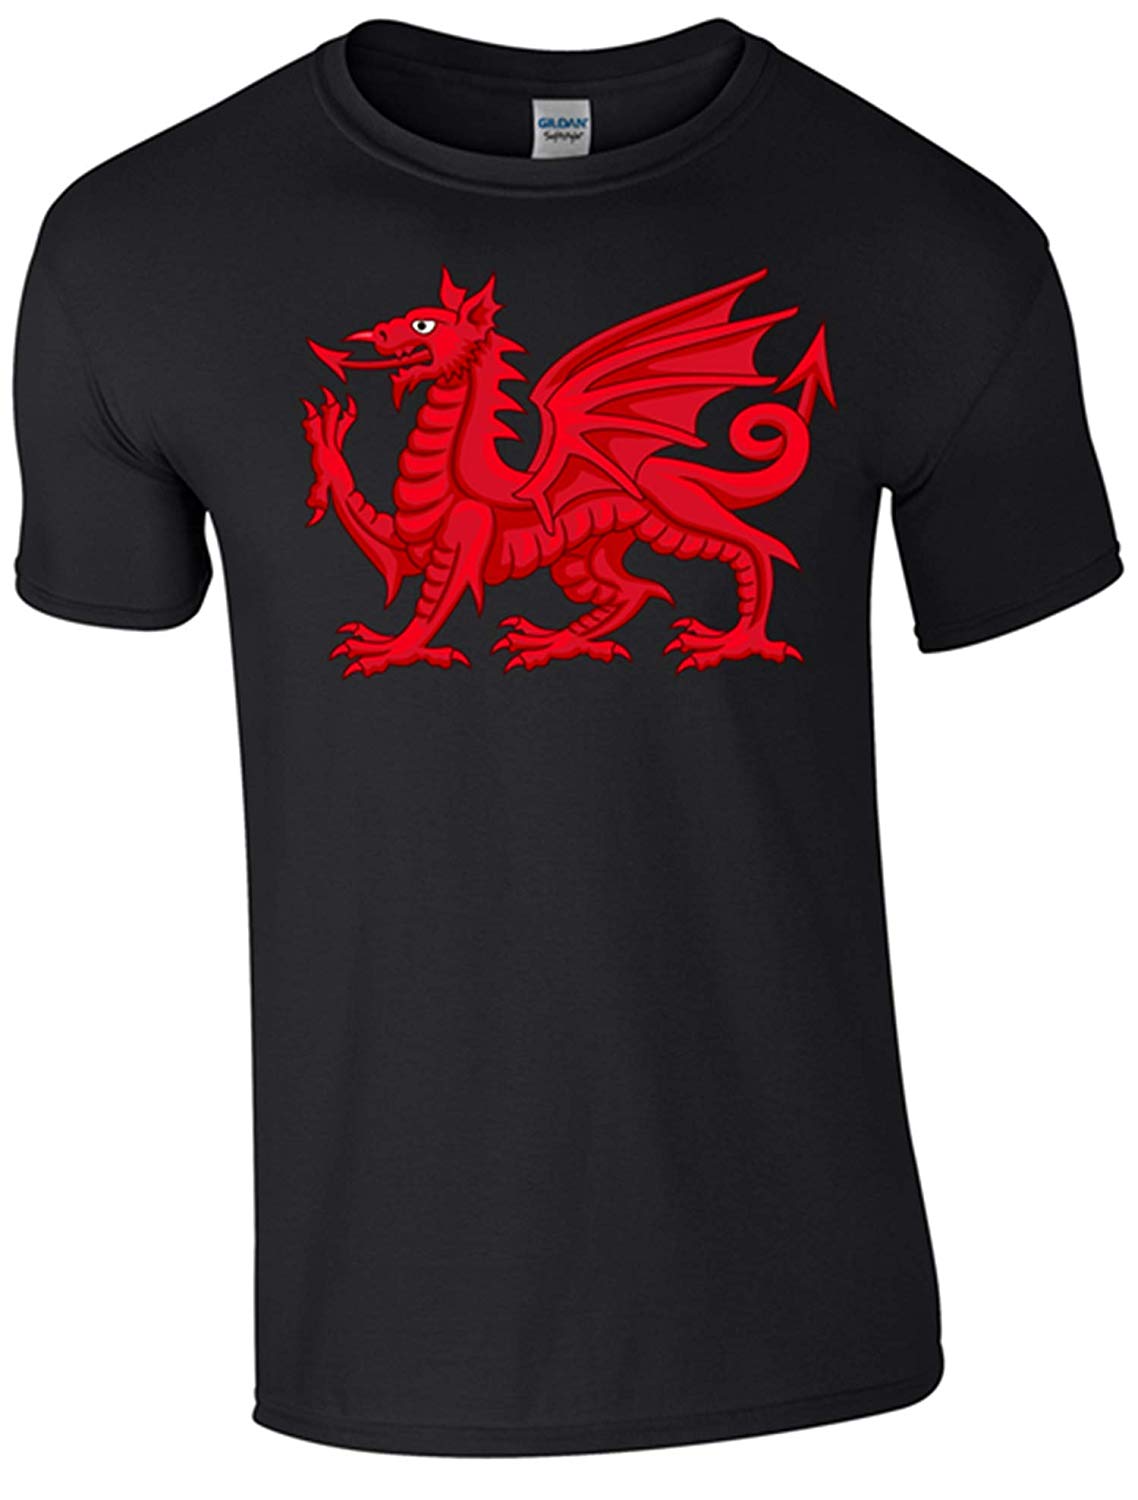 Army 1157 Kit St David's Day Dragon T-Shirt Printed DTG (Direct to Garment) for a Permanent Finish. - Army 1157 kit Black / L Army 1157 Kit Veterans Owned Business